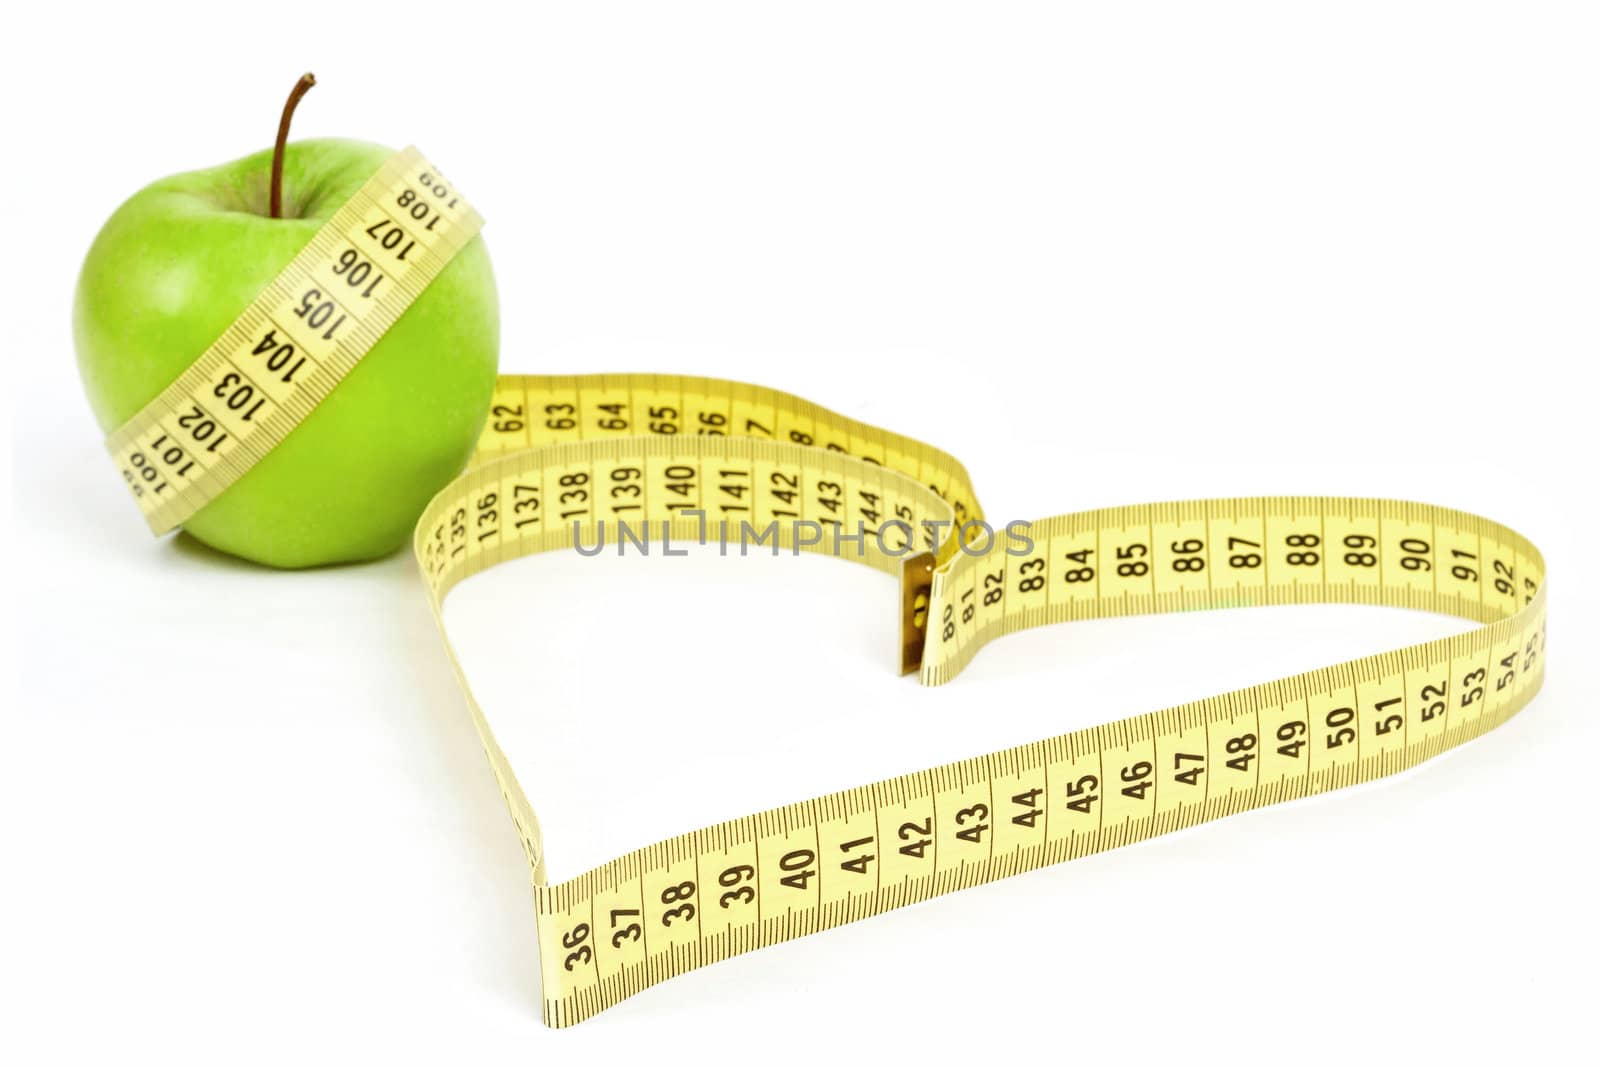 Tape measure heart shape and green apple  - health, weight concept 